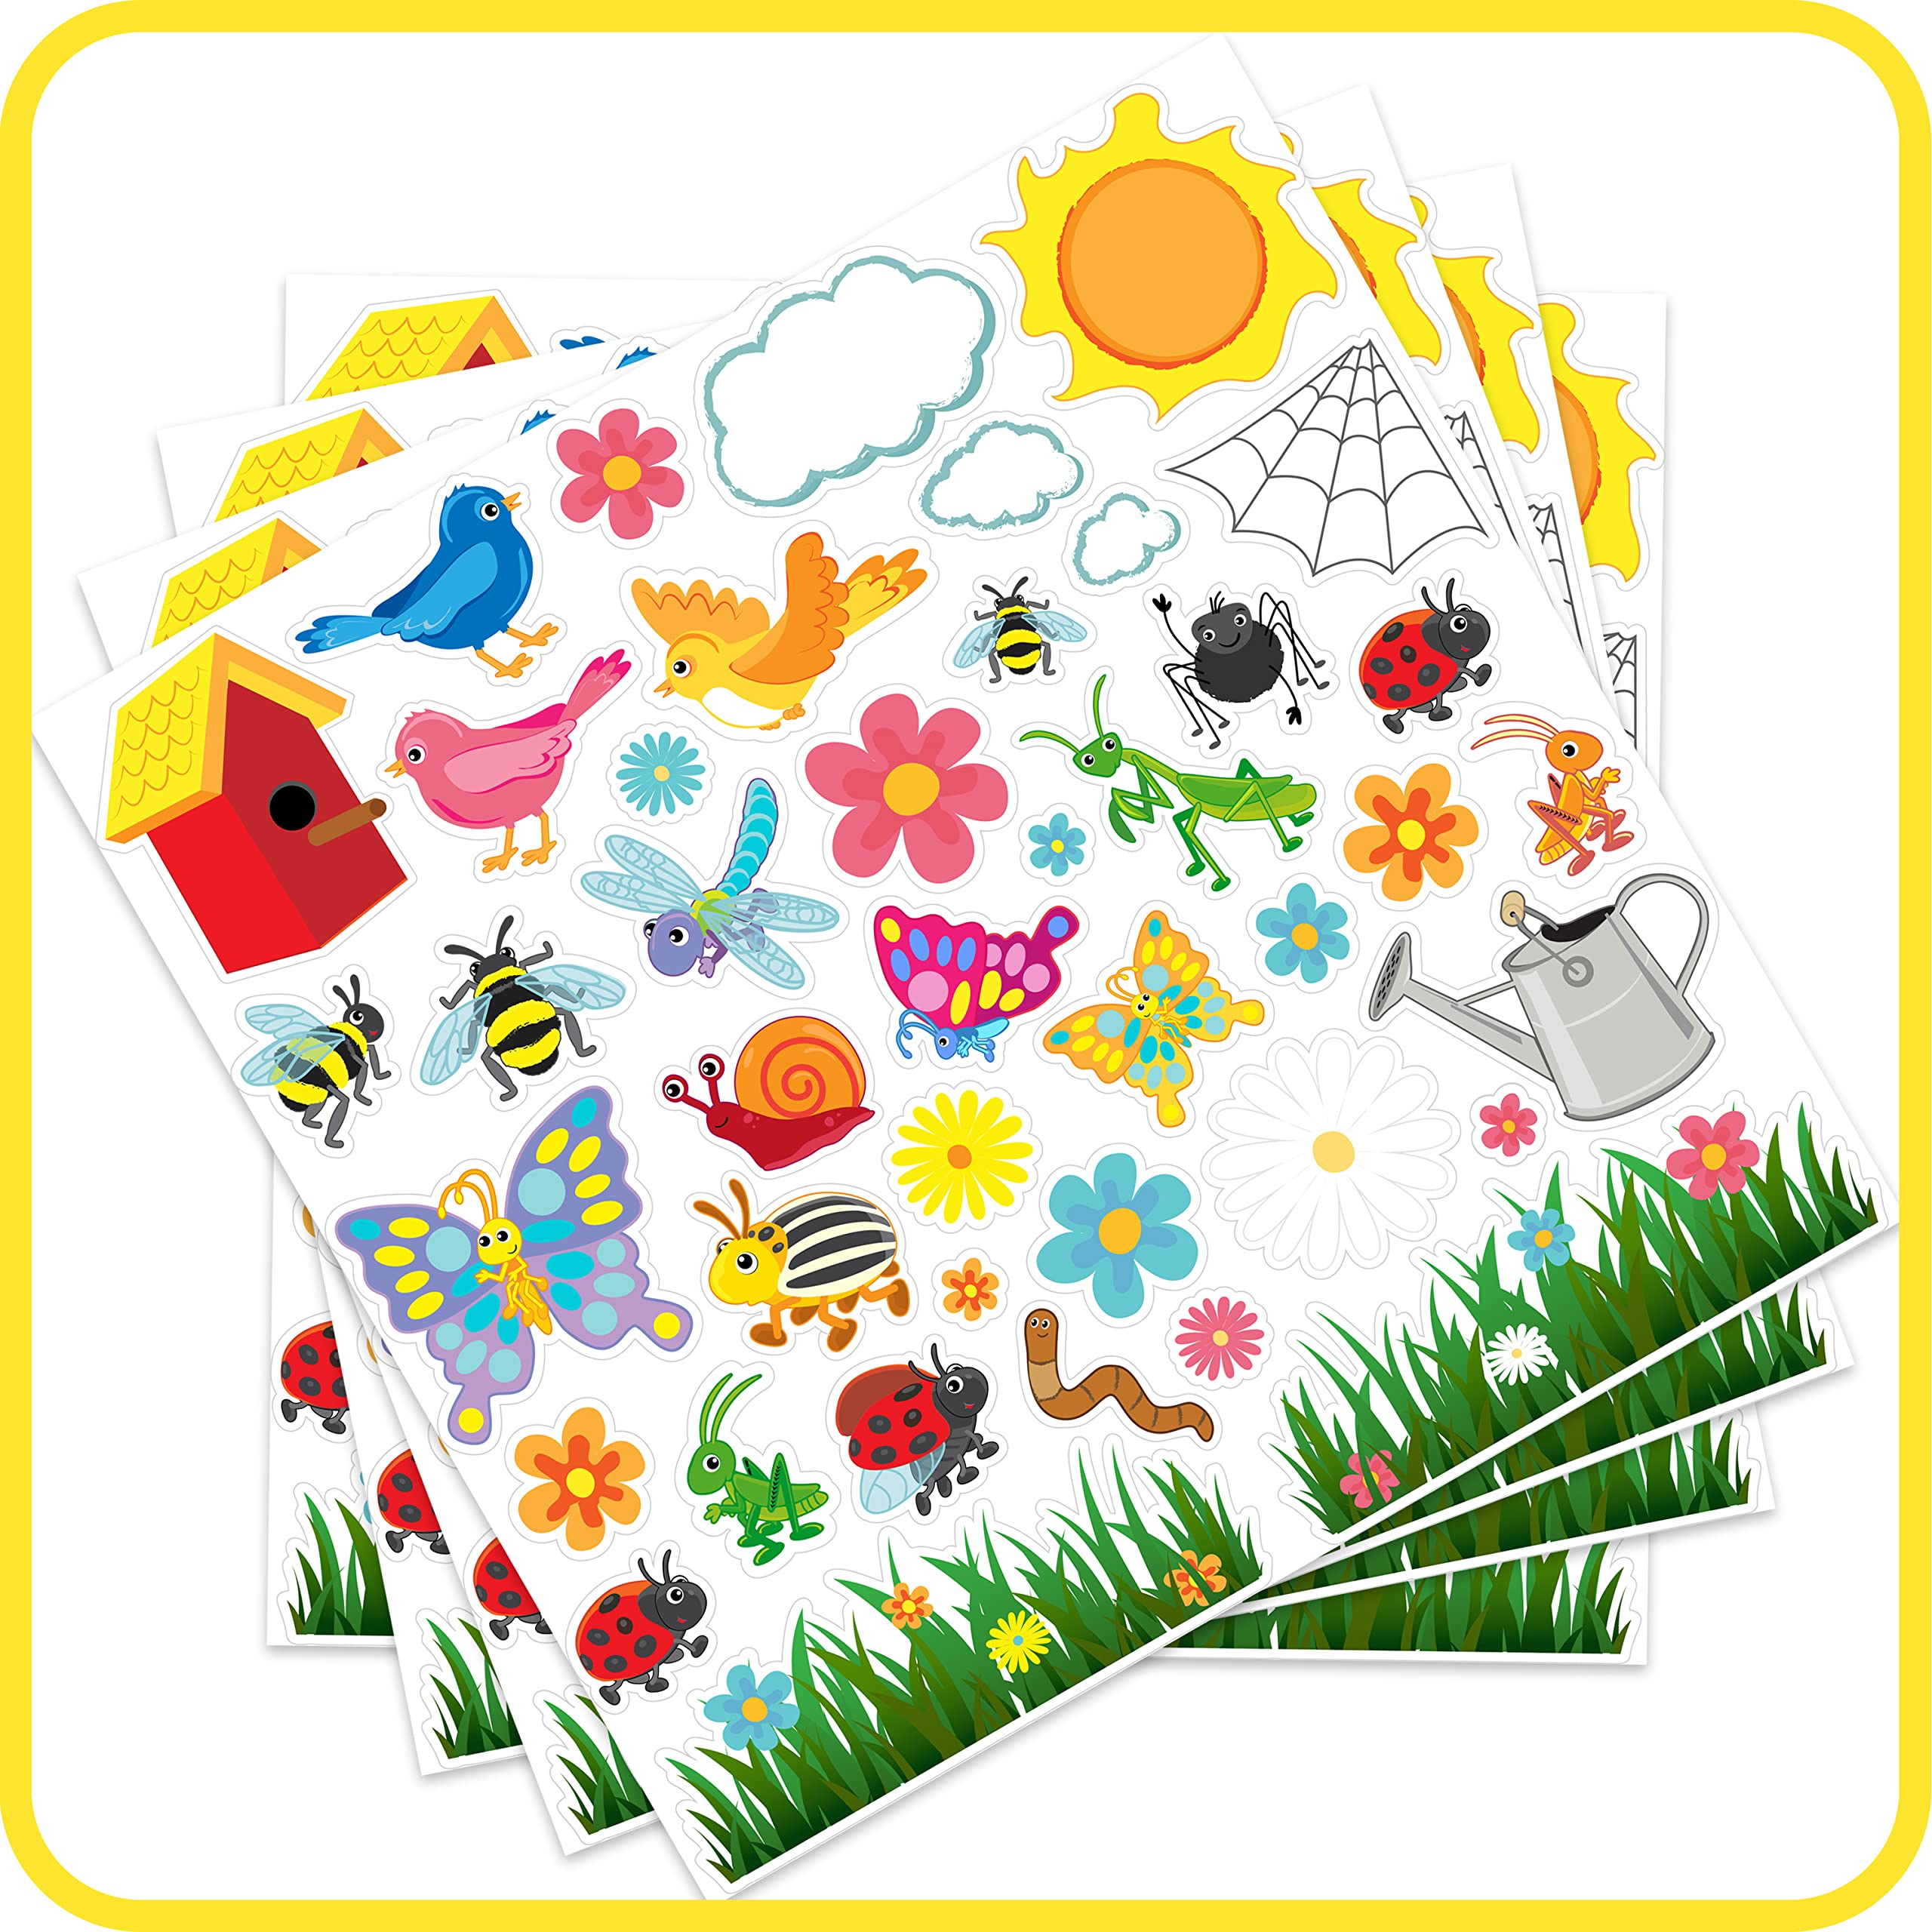 READY 2 LEARN Foam Stickers - Garden - Pack of 168 - Self-Adhesive Stickers for Kids - 3D Puffy Flower Stickers for Laptops, Party Favors and Crafts